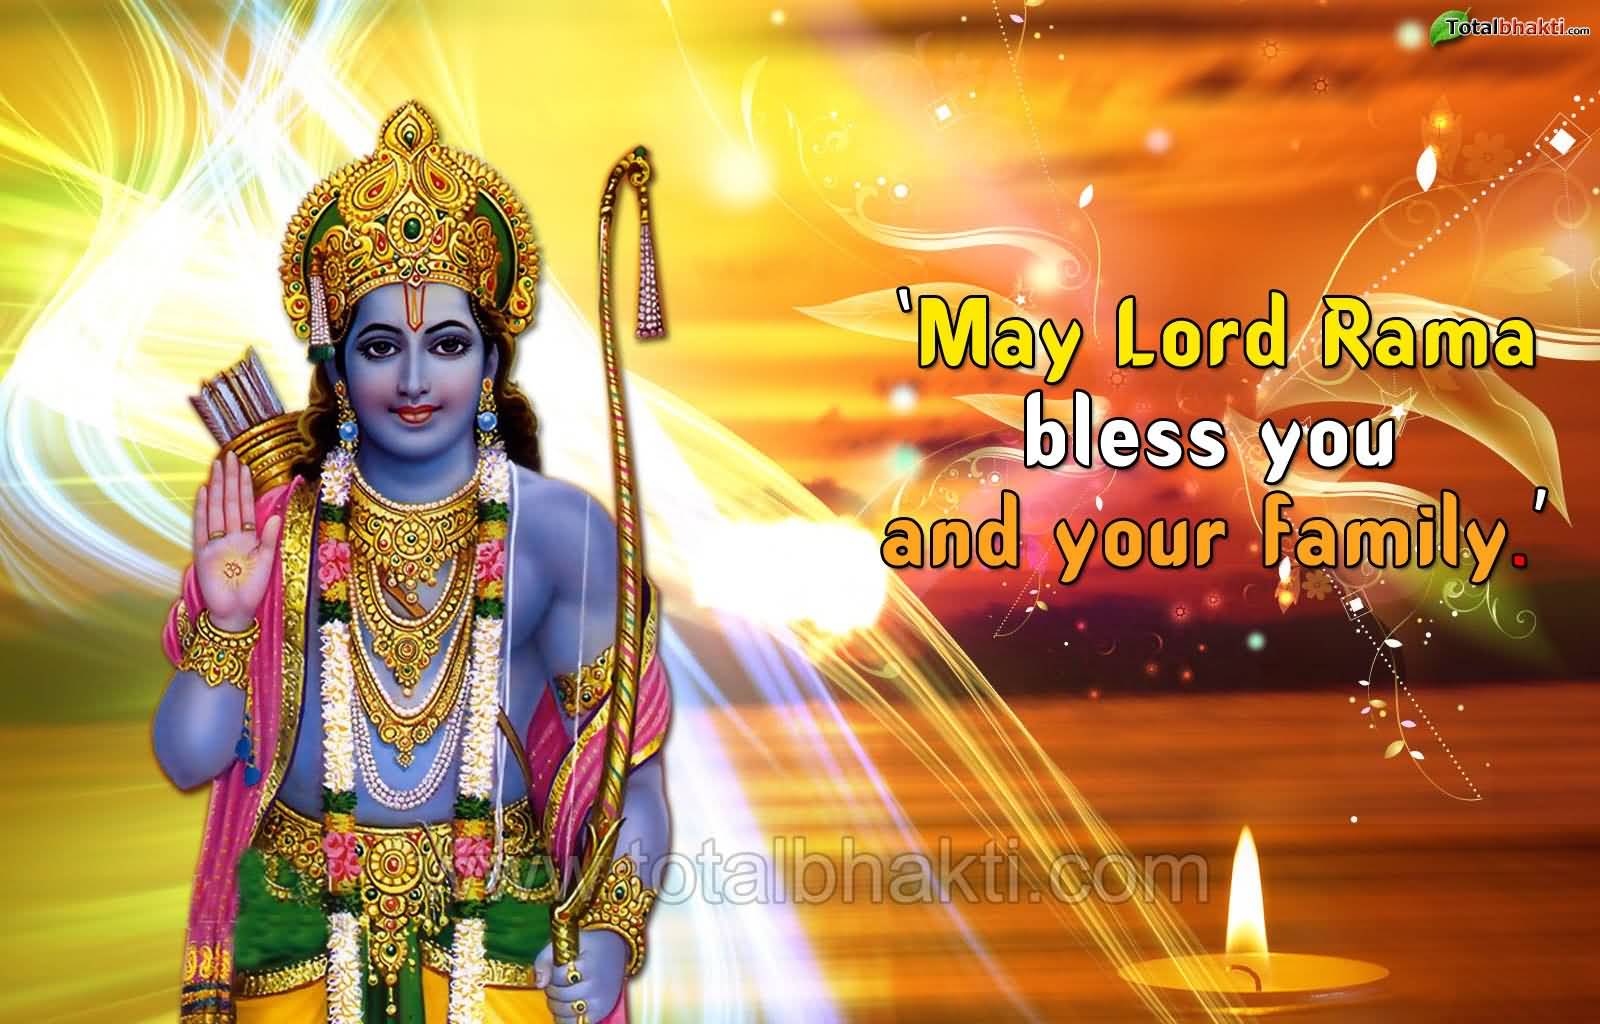 May Lord Rama Bless You And Your Family On Ram Navami